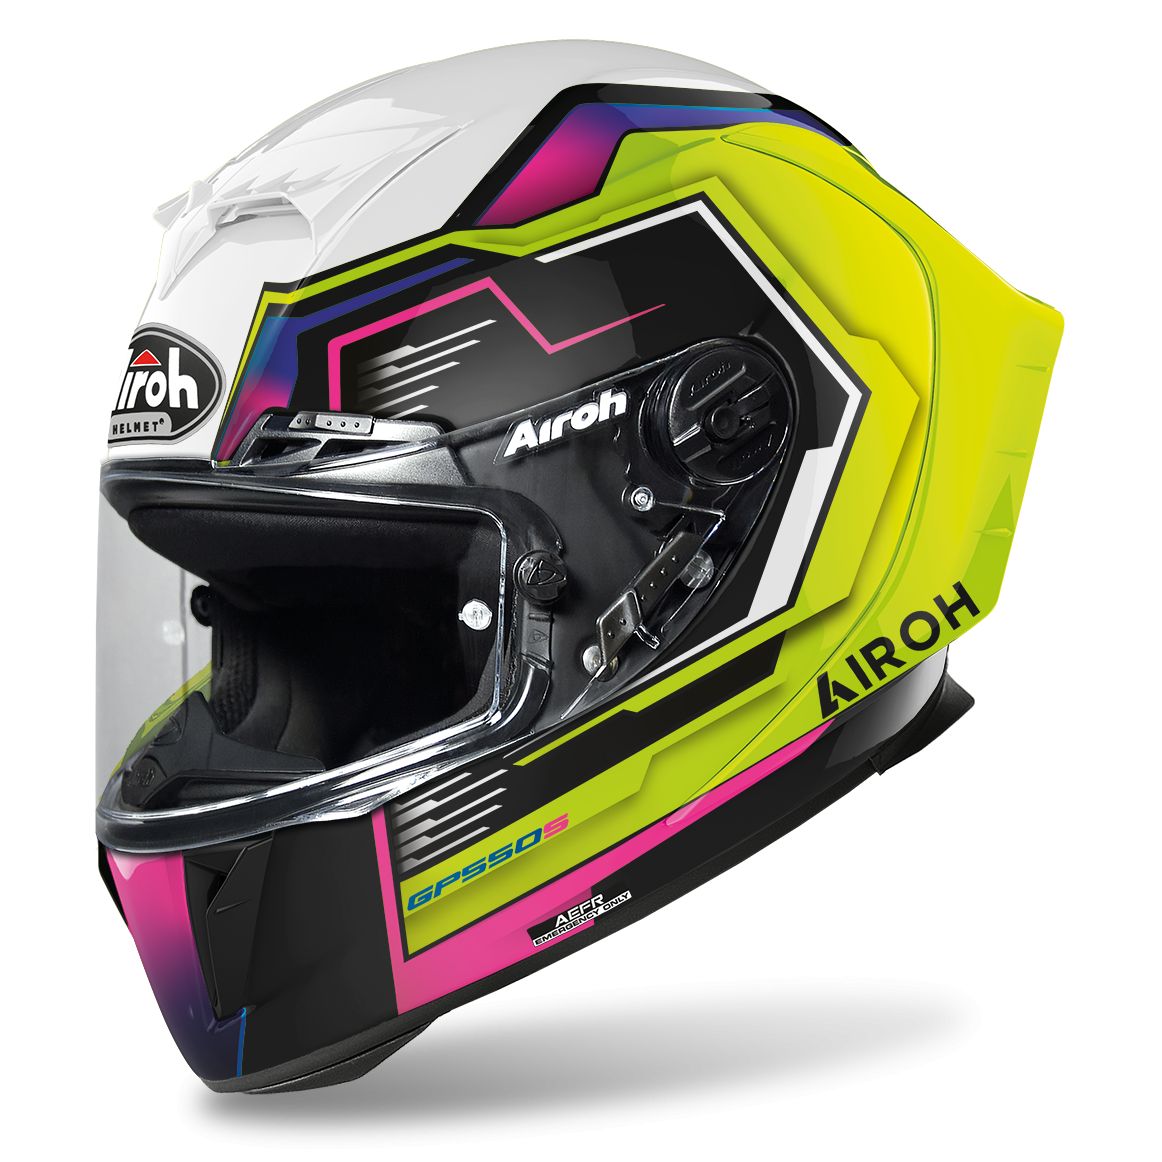 Image of Casque Airoh GP550 S - RUSH - MULTICOLOR GLOSS